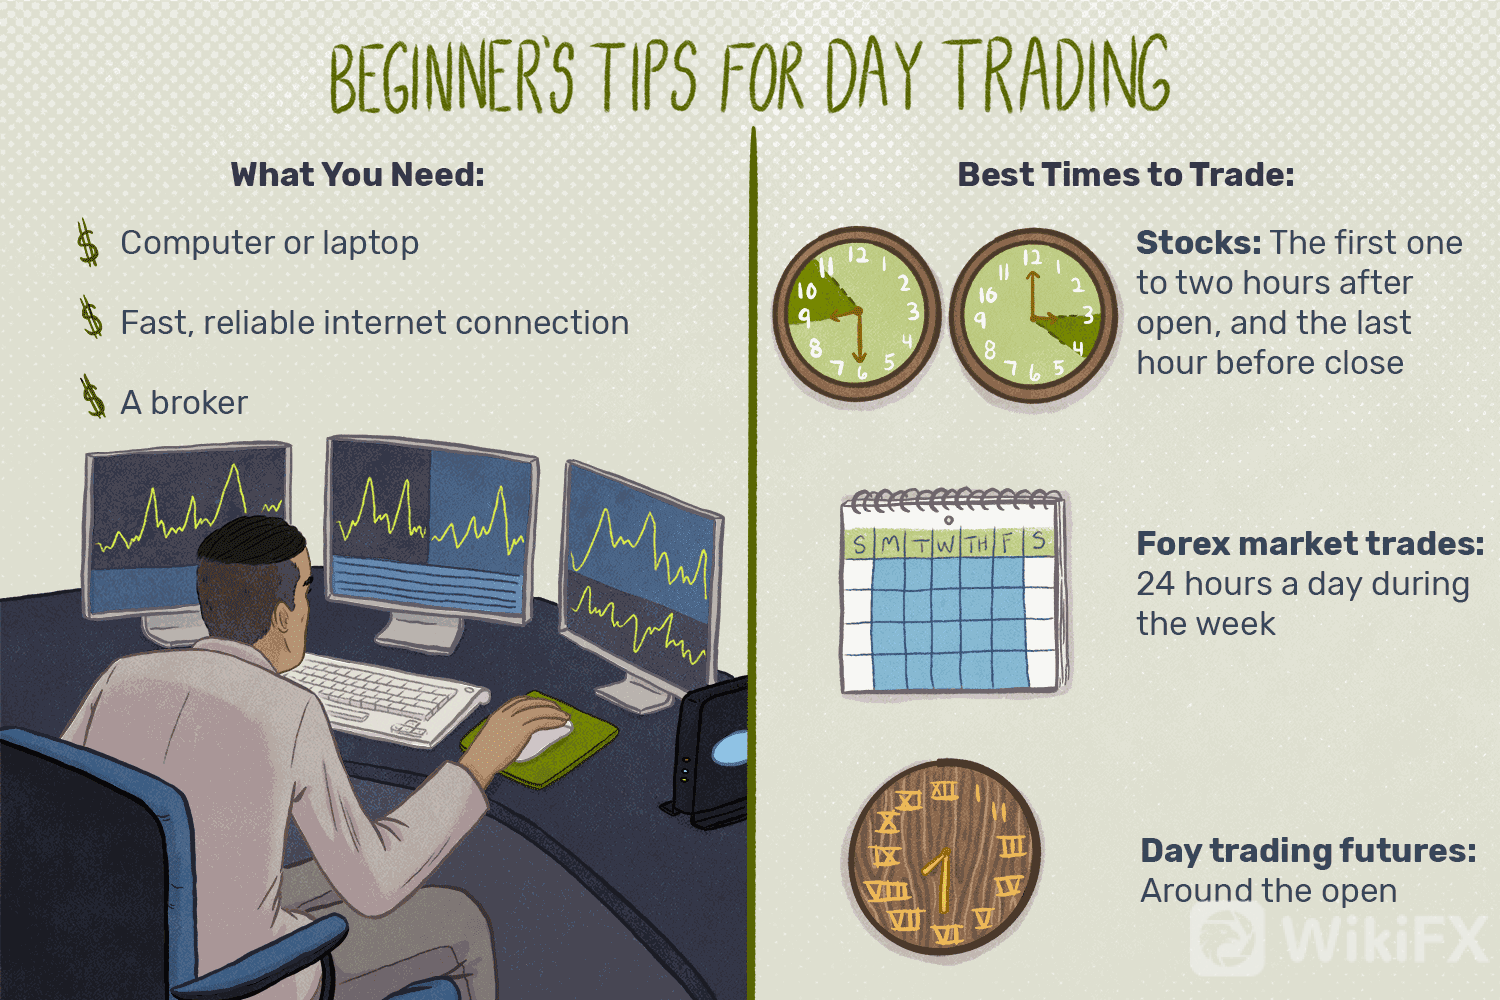 day-trading-tips-for-beginners-on-getting-started-4047240_FINAL-e9aa119145324592addceb3298e8007c.png